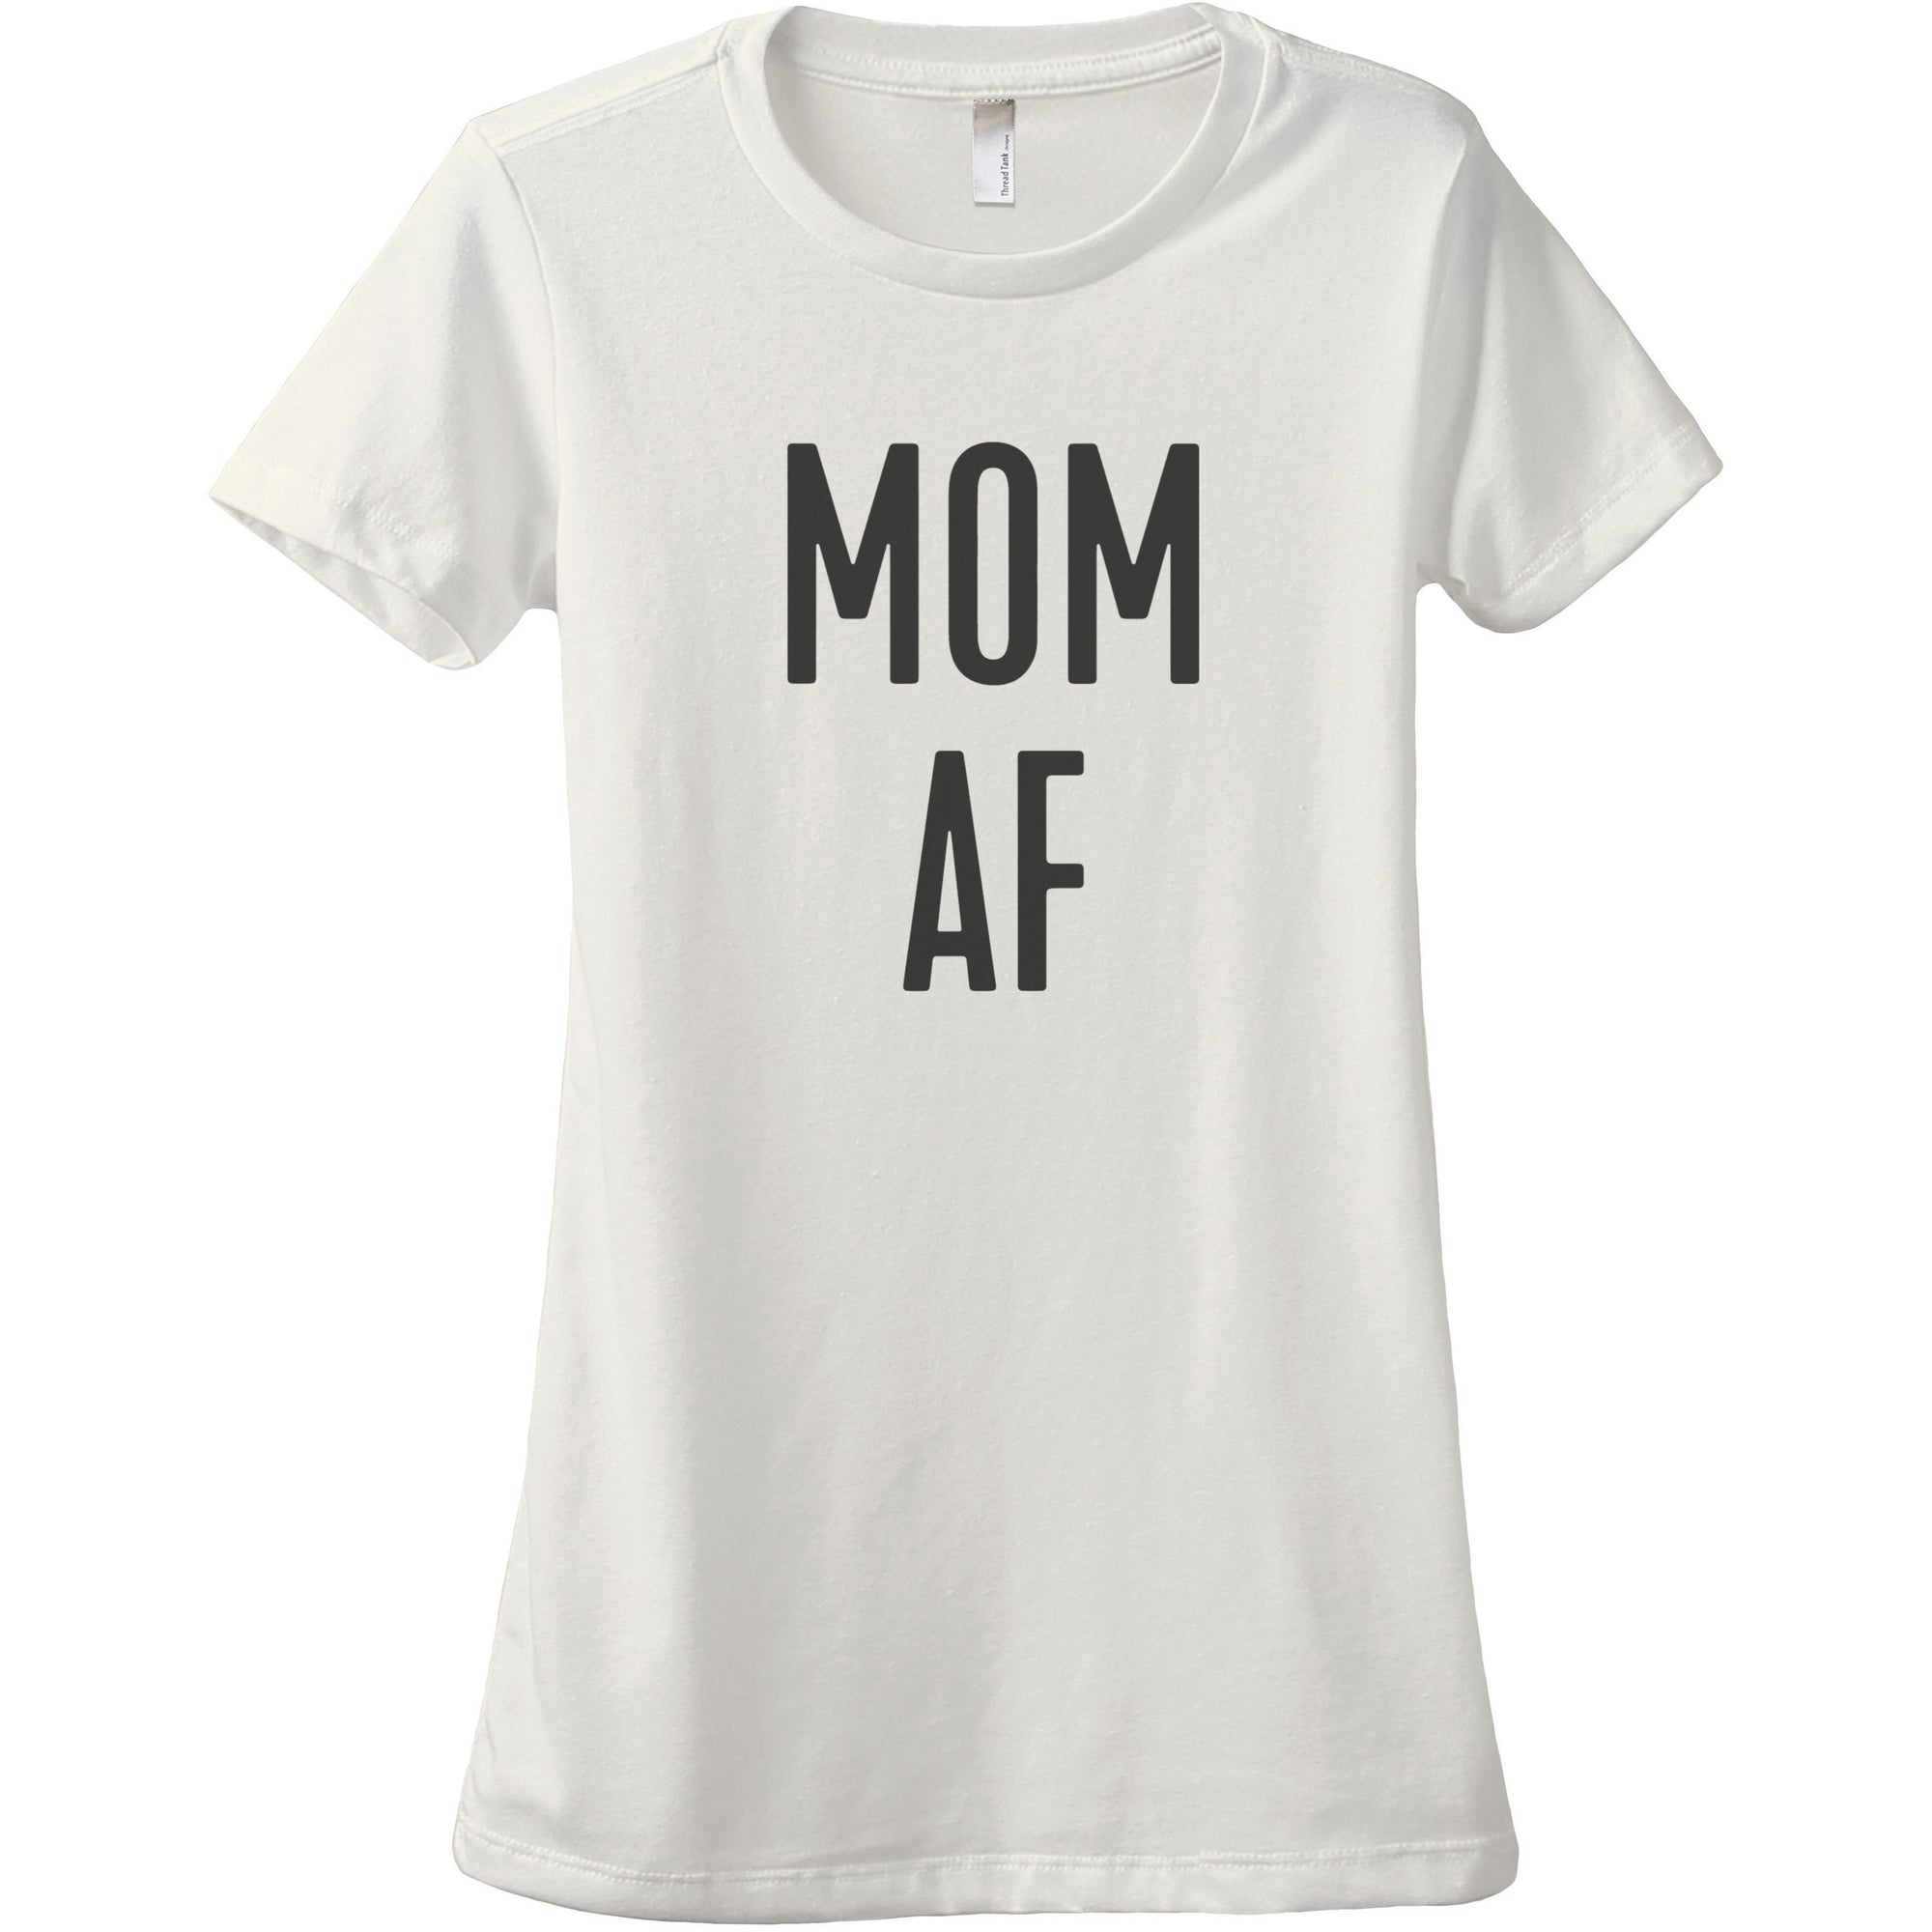 Mom AF - thread tank | Stories you can wear.